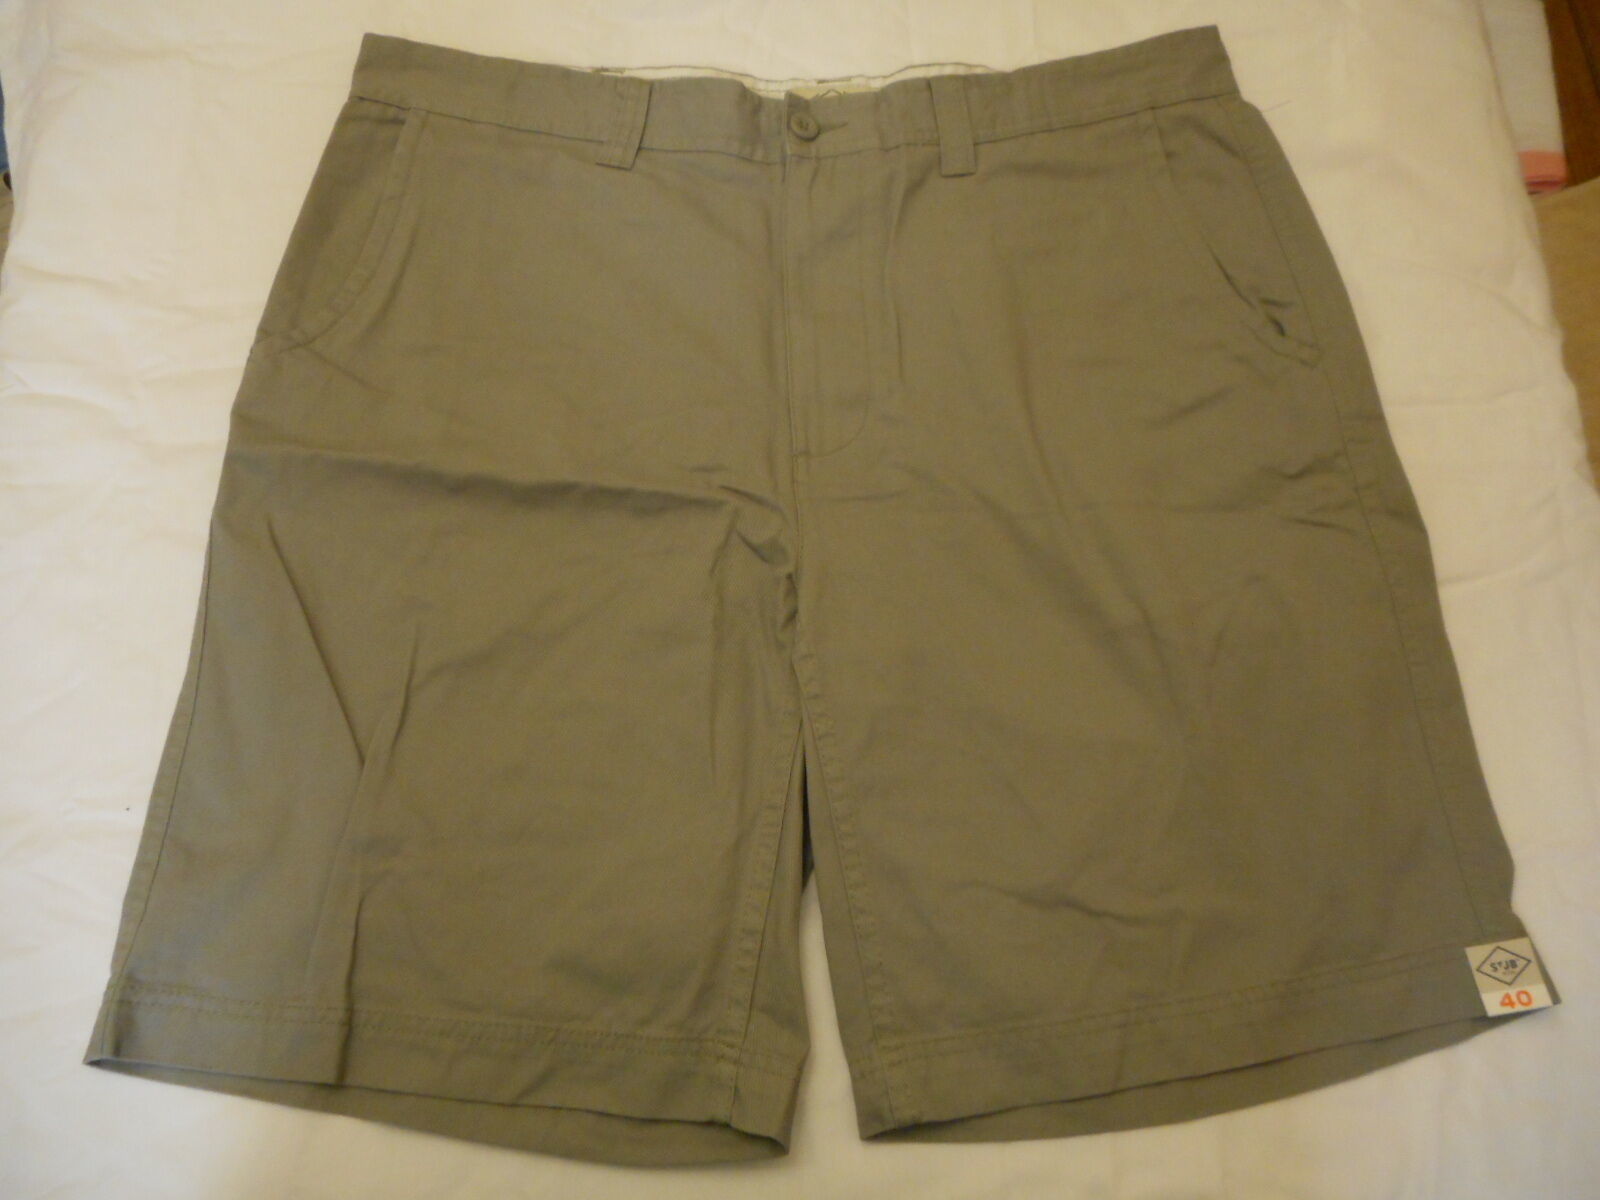 Primary image for Men's St. John's Bay Legacy Flat Front Shorts Wild Dove  Size 40 NEW